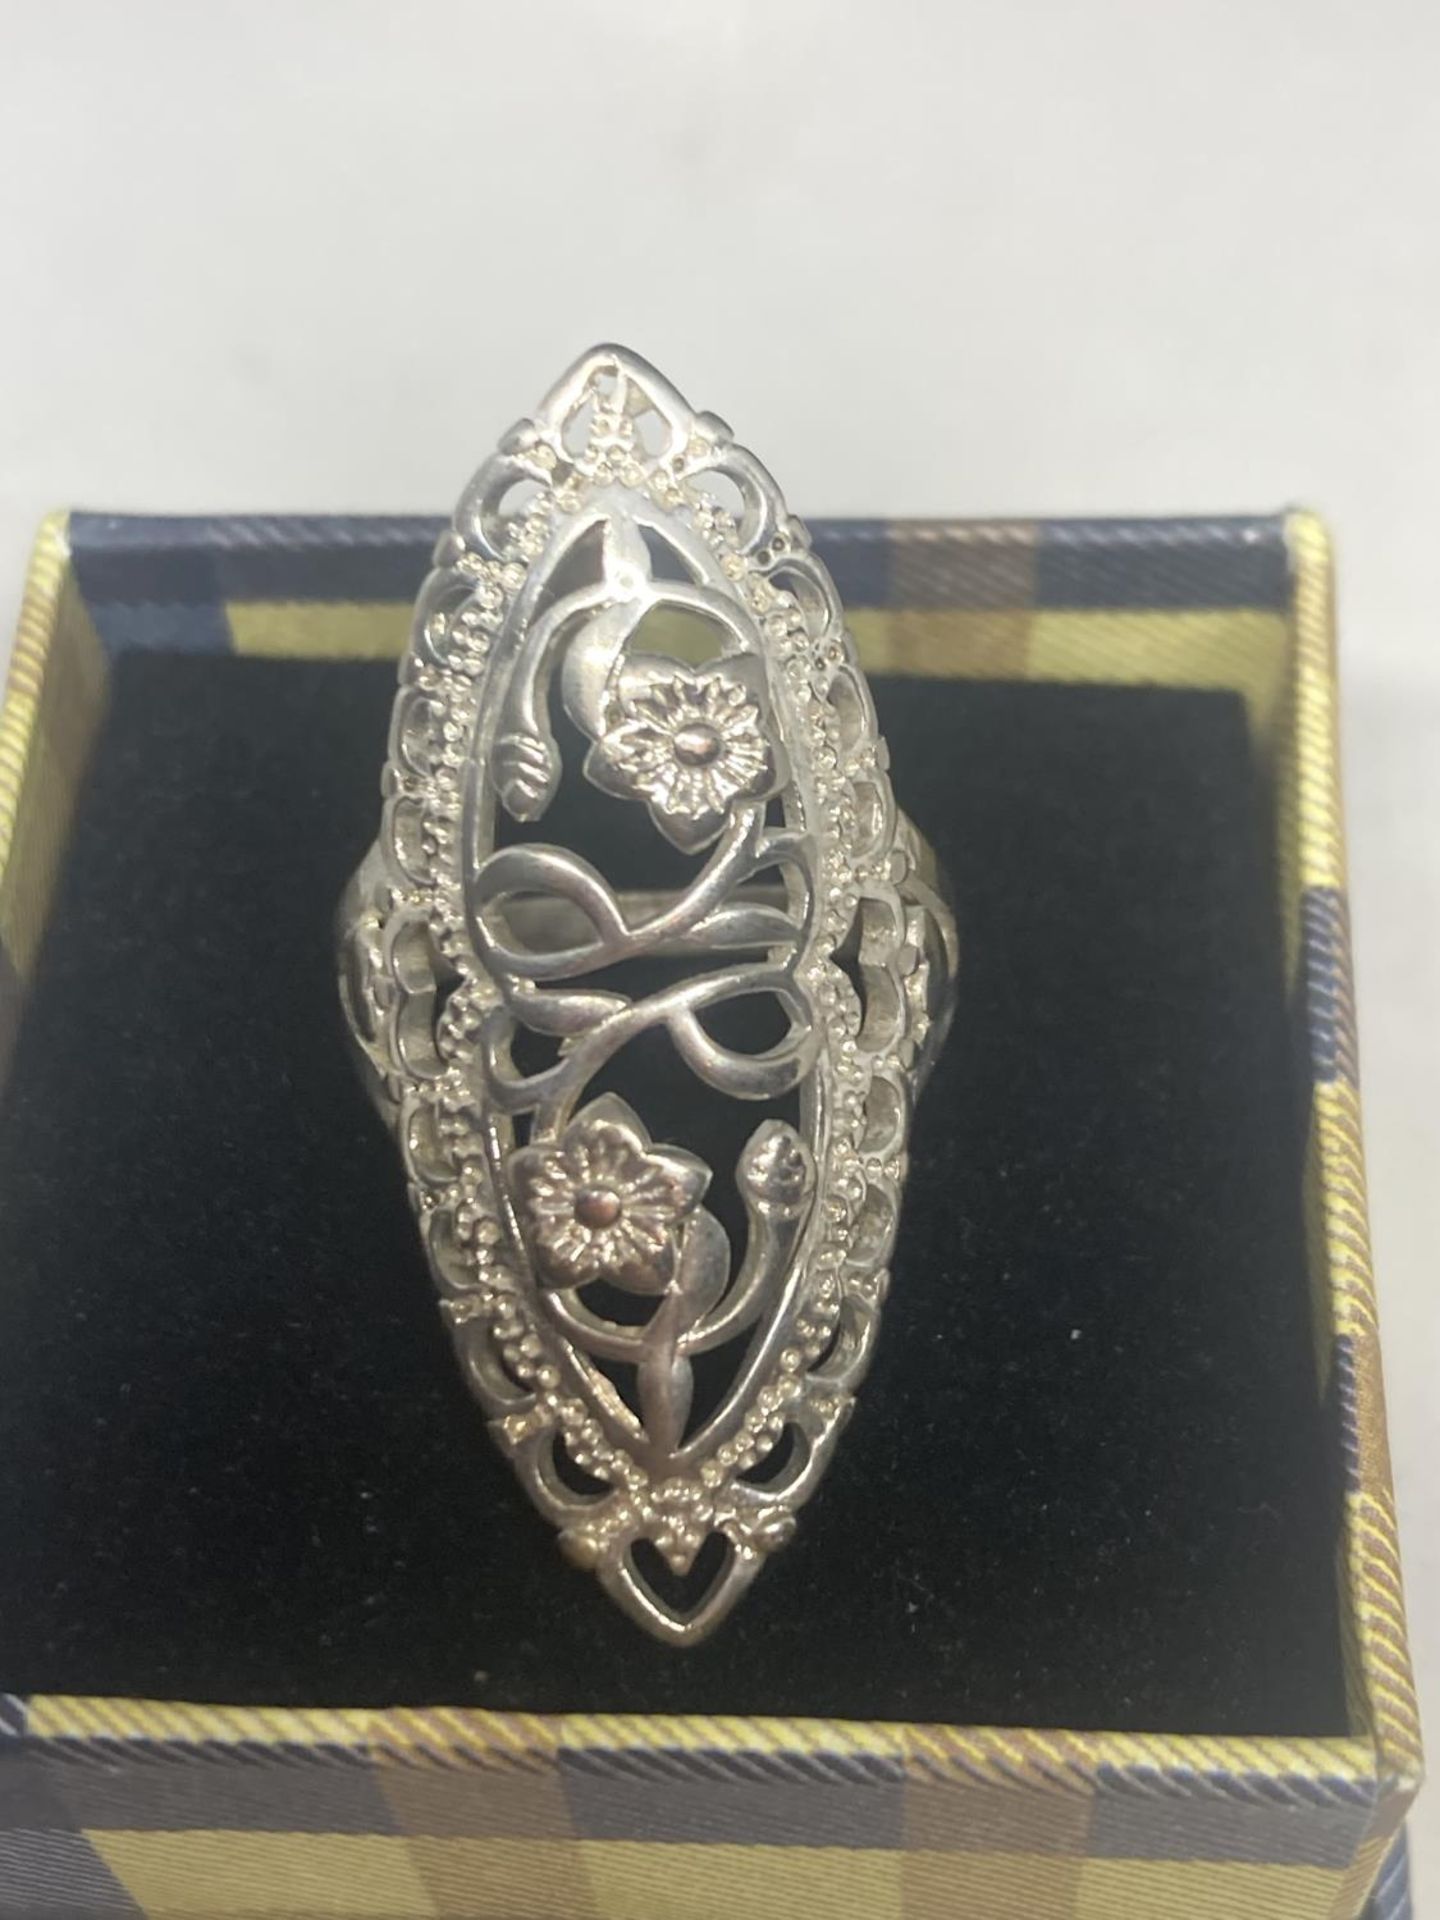 A MARKED 925 LARGE DECORATIVE FLORAL RING IN A PRESENTATION BOX - Image 3 of 6